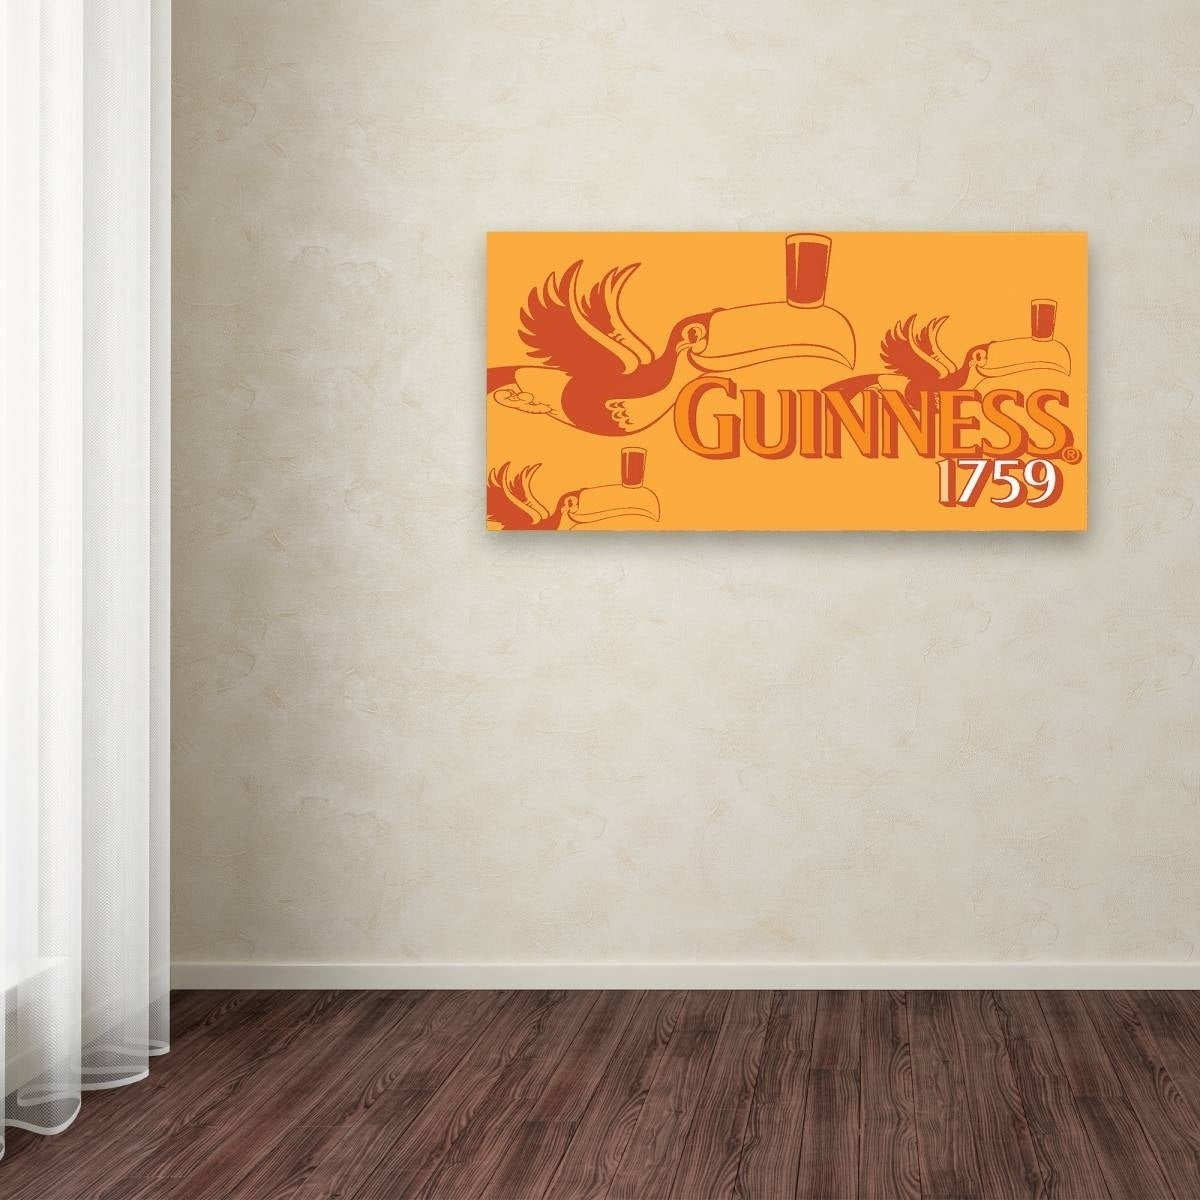 Guinness Brewery 'Guinness 1759' canvas art decorated with vibrant orange color, representing the iconic Guinness brand established in 1759.